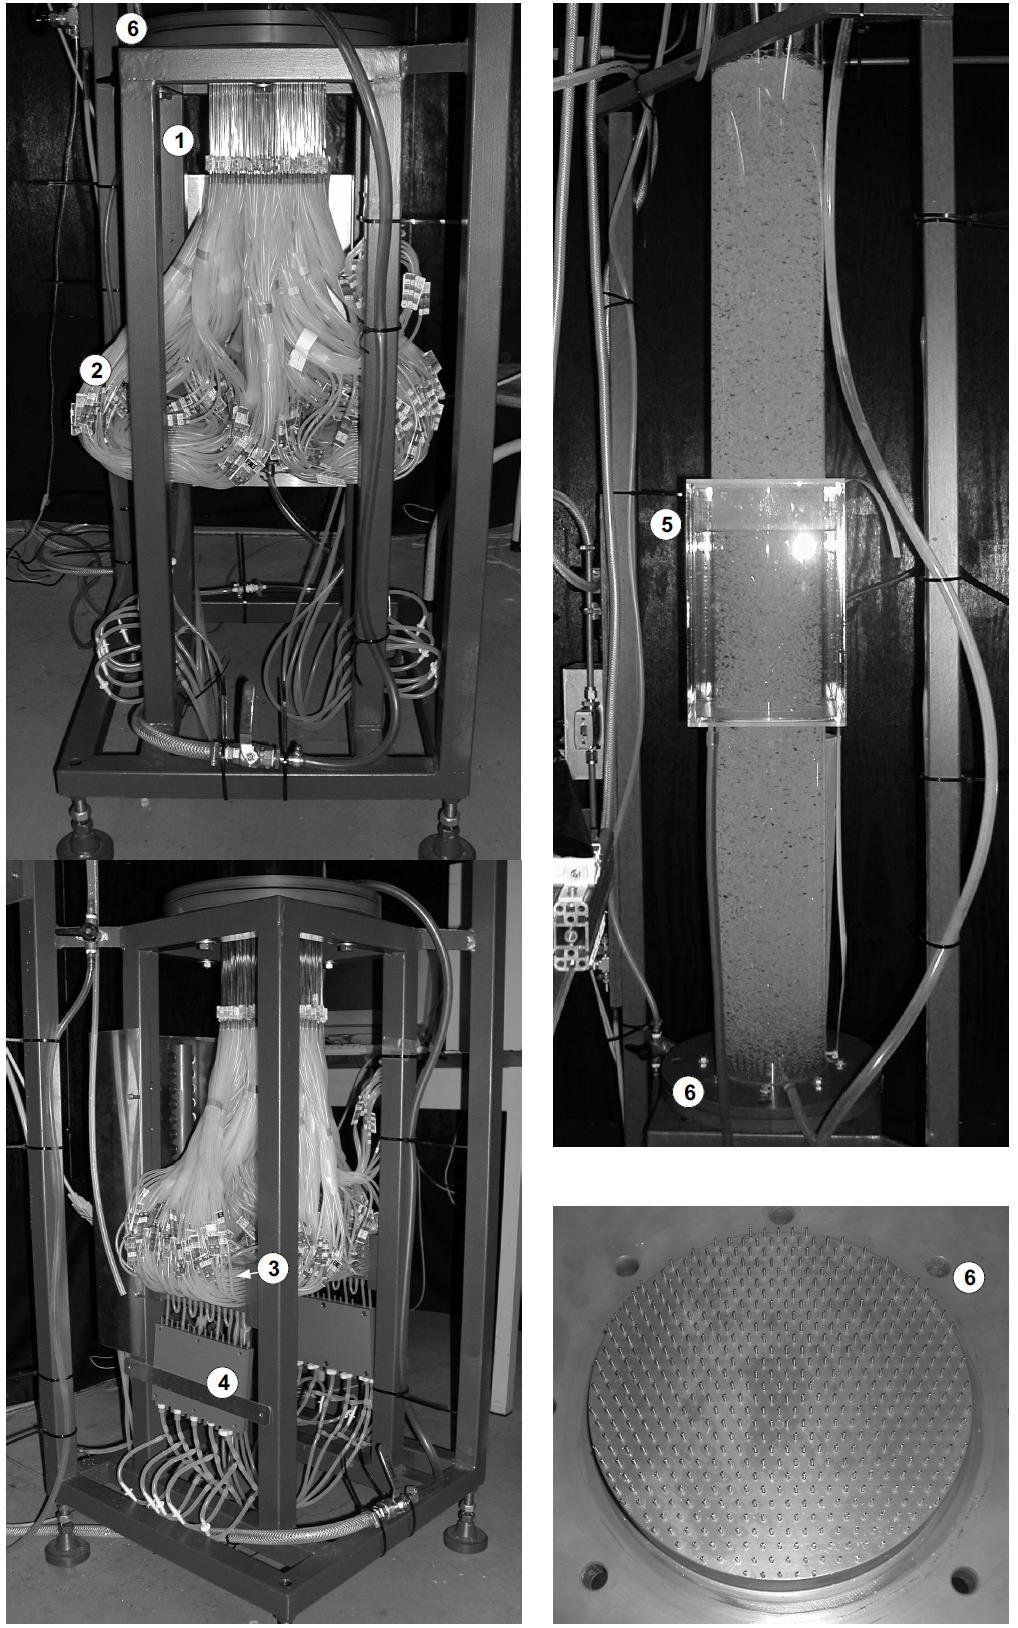 64 Fig. 36. The Harteveld (2005) experimental setup for the cylindrical bubble column.